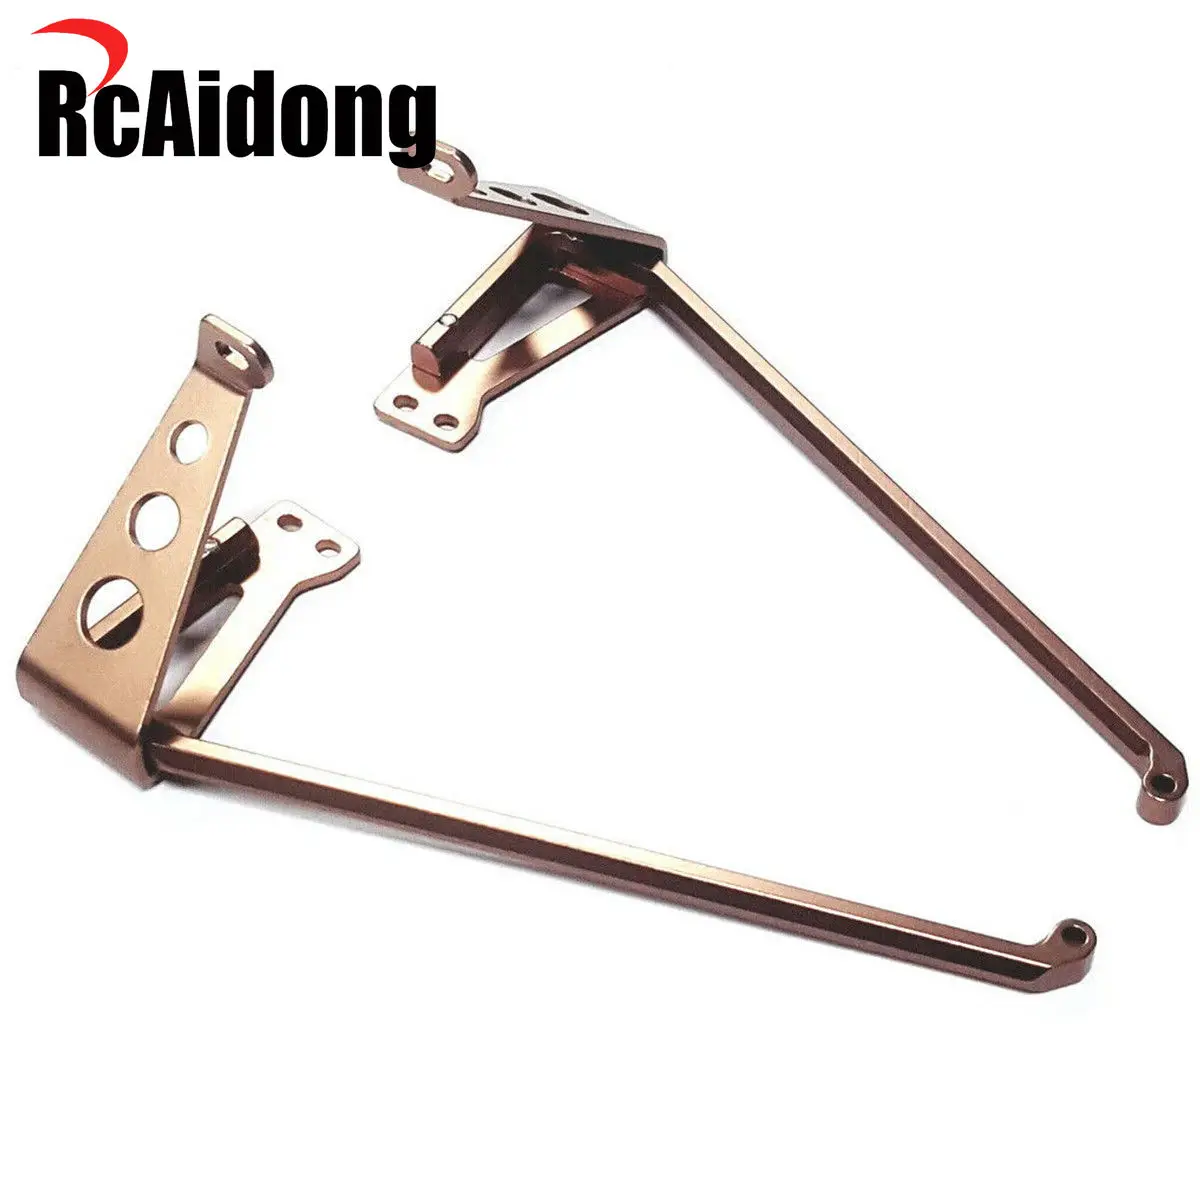 

RcAidong Aluminum Side Bumper Anti-Collision for Tamiya Grasshopper / Hornet Chassis